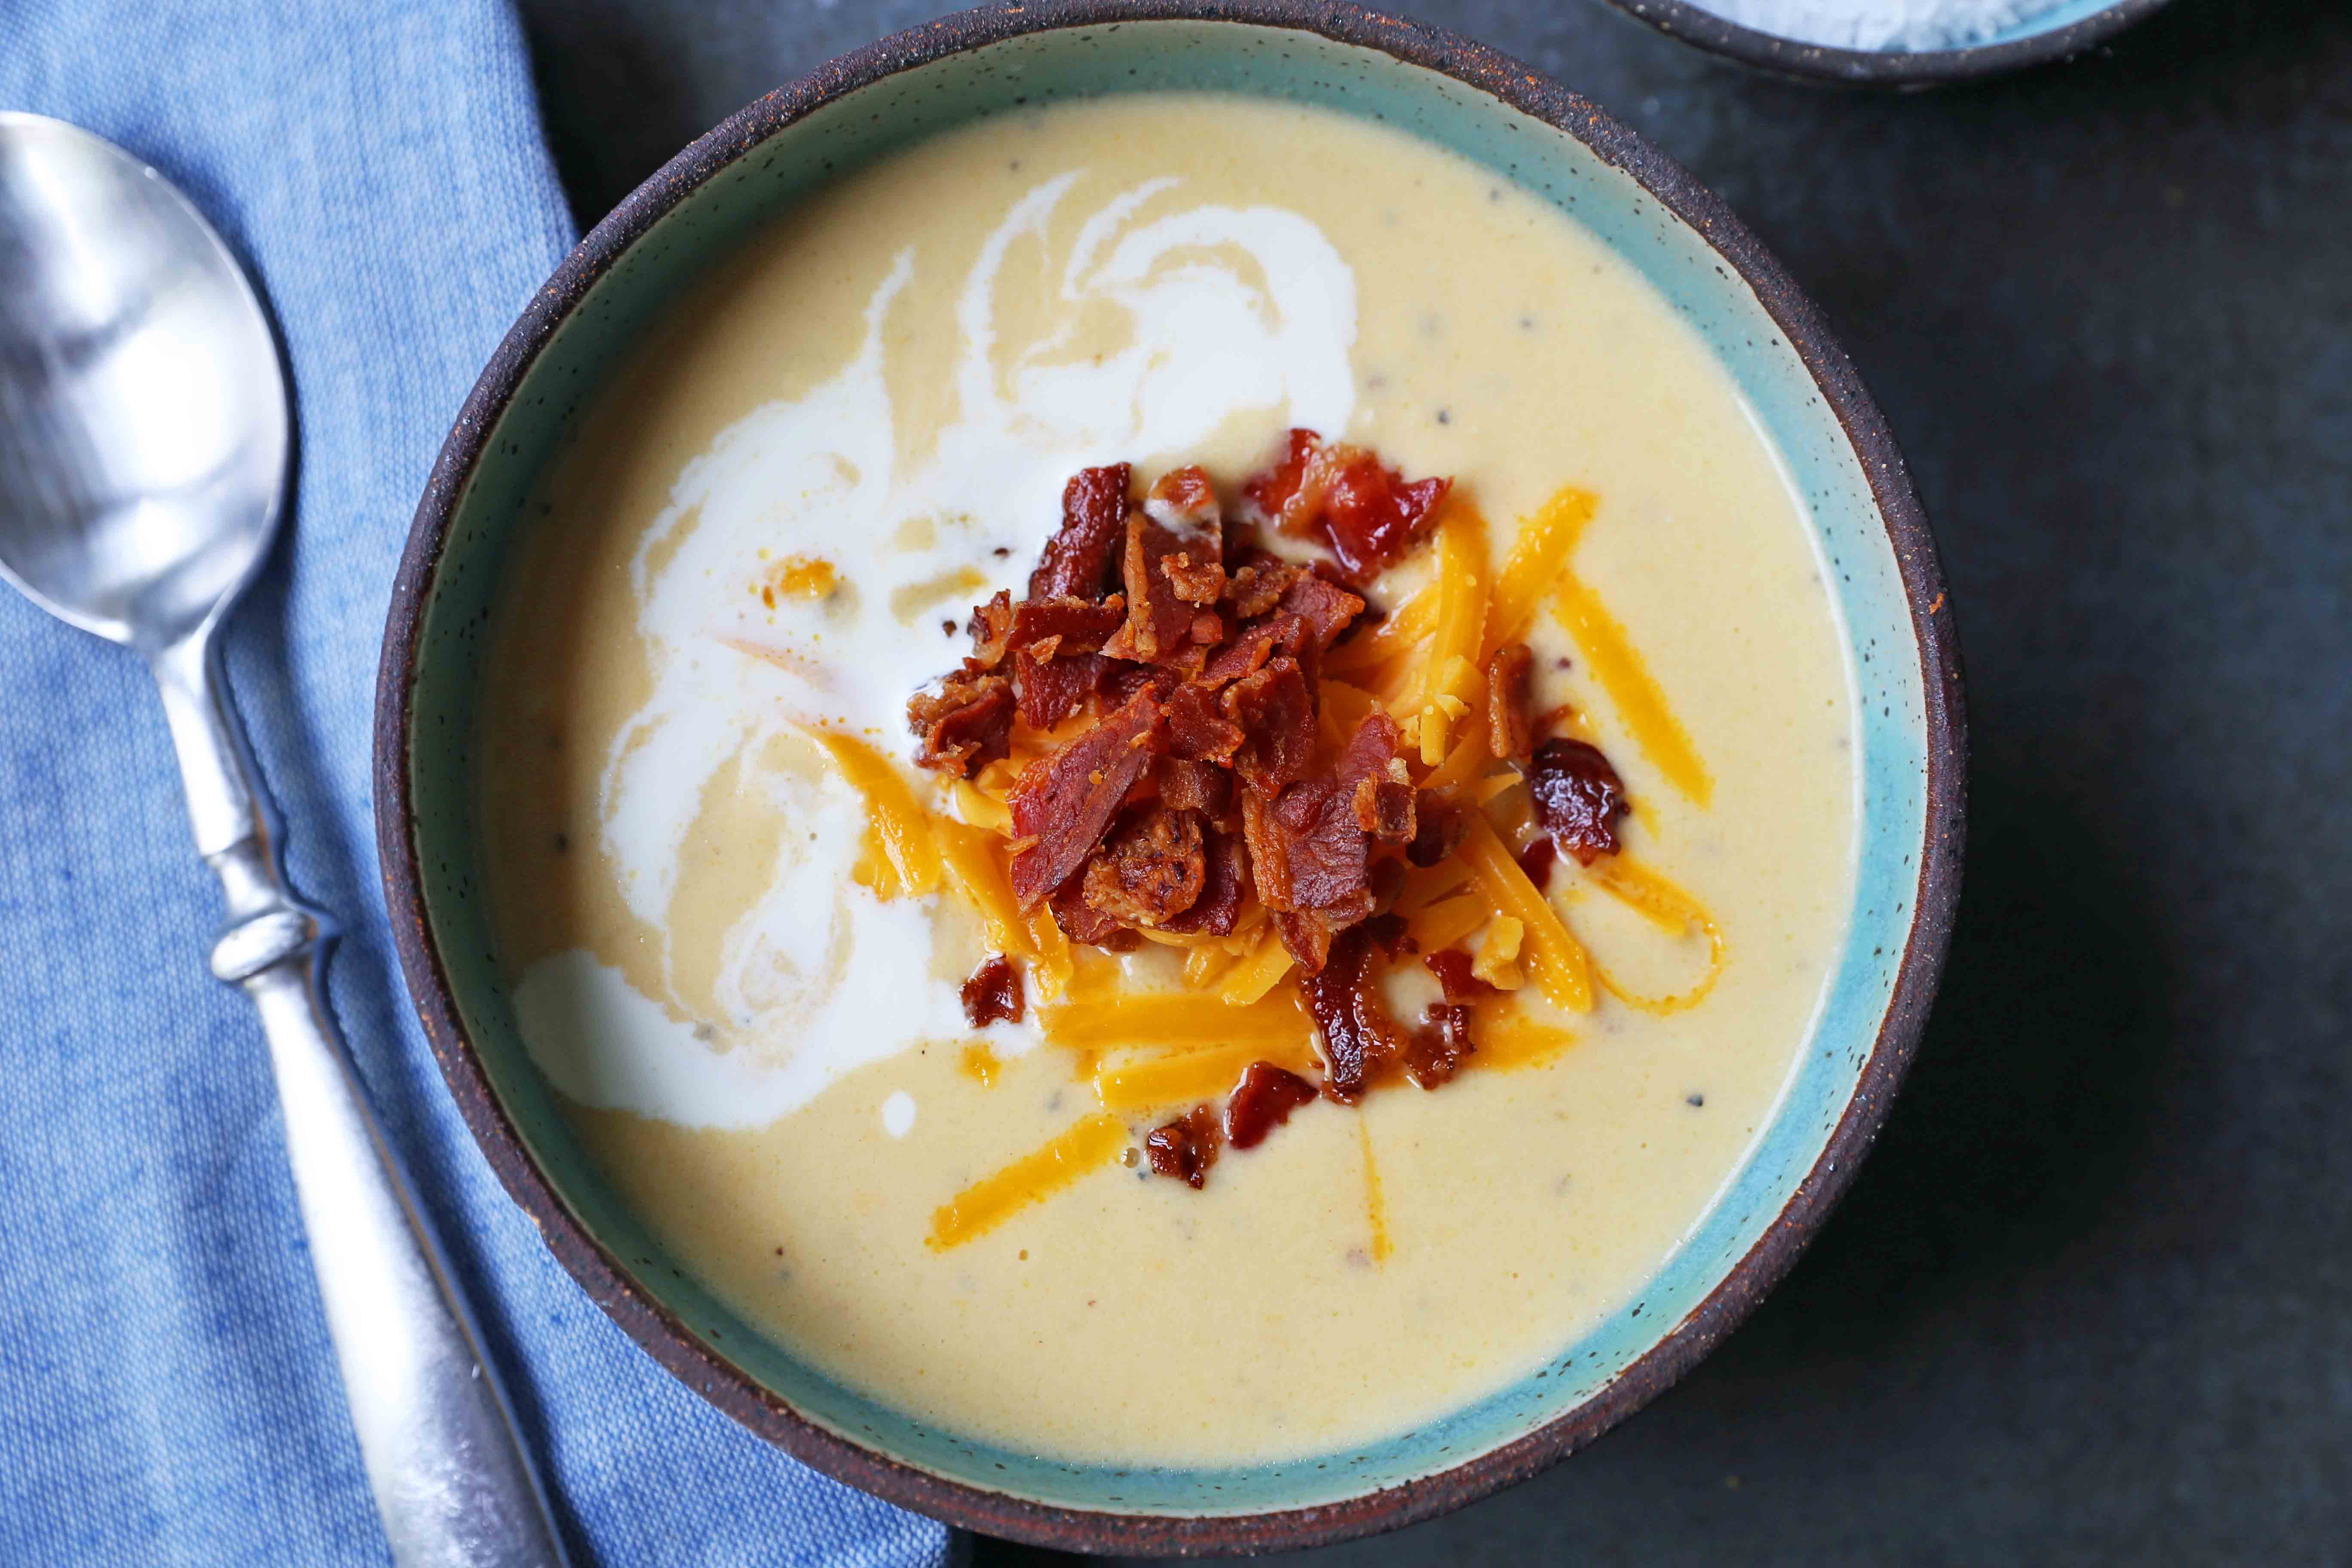 Cheesy Cauliflower Soup. A creamy cheesy cauliflower soup made with fresh cauliflower, cream, sharp cheddar cheese, and bacon. A velvety smooth cream of cauliflower soup will become a winter staple in your home! www.modernhoney.com #cauliflowersoup #cheesycauliflowersoup #creamofcauliflowersoup #soup #souprecipes